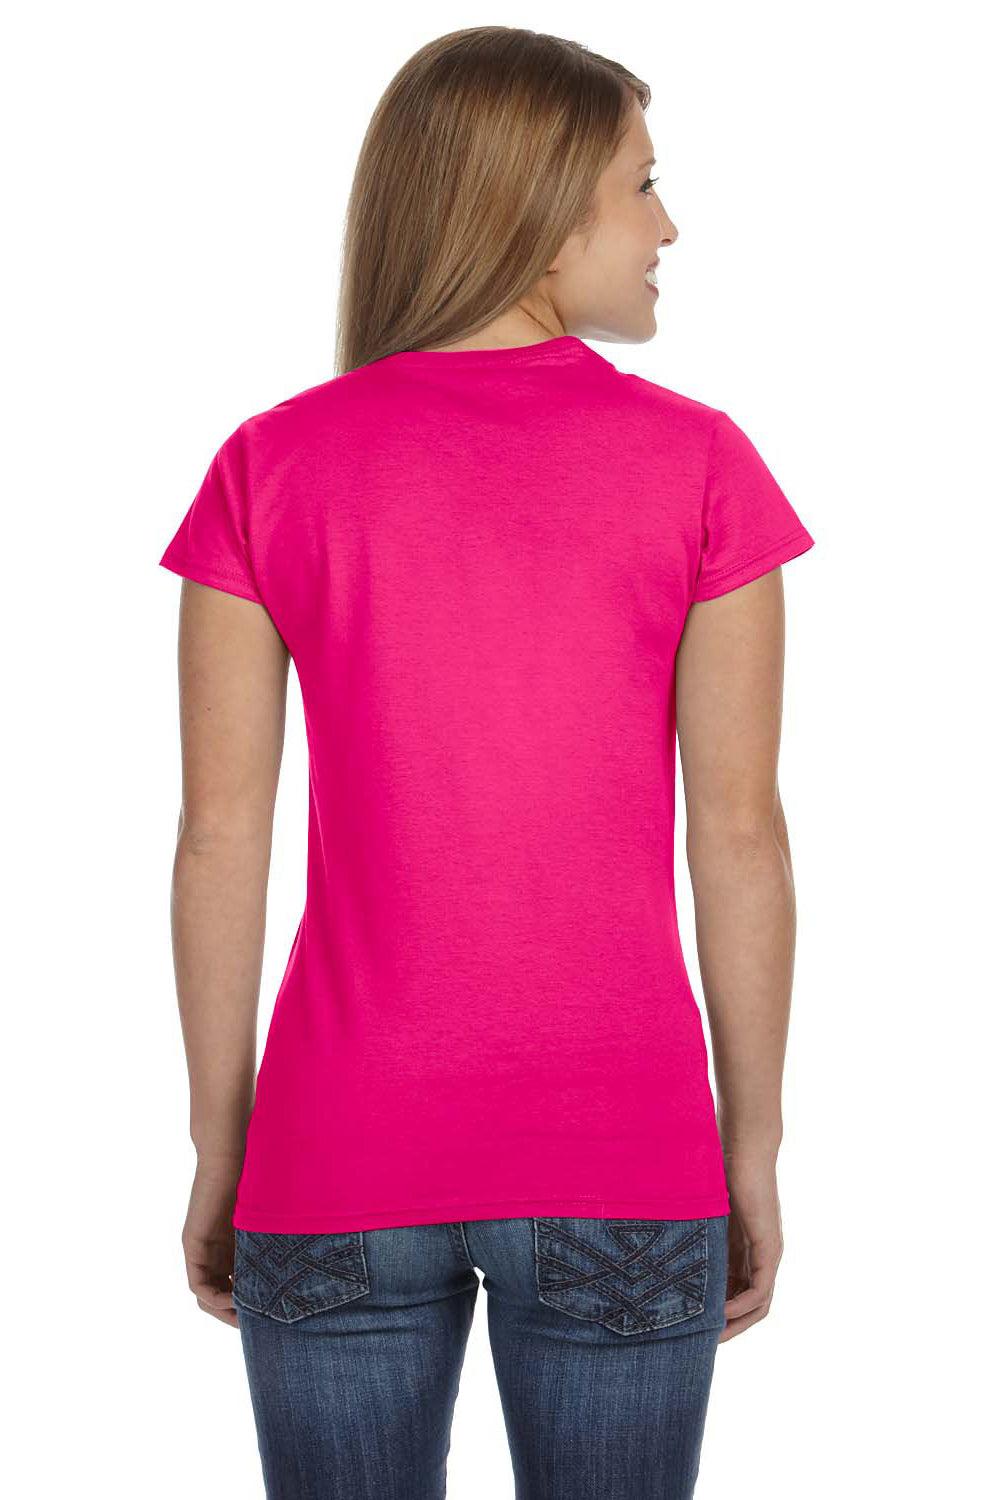 Gildan G640L Womens Softstyle Short Sleeve Crewneck T-Shirt Antique Heliconia Pink Back